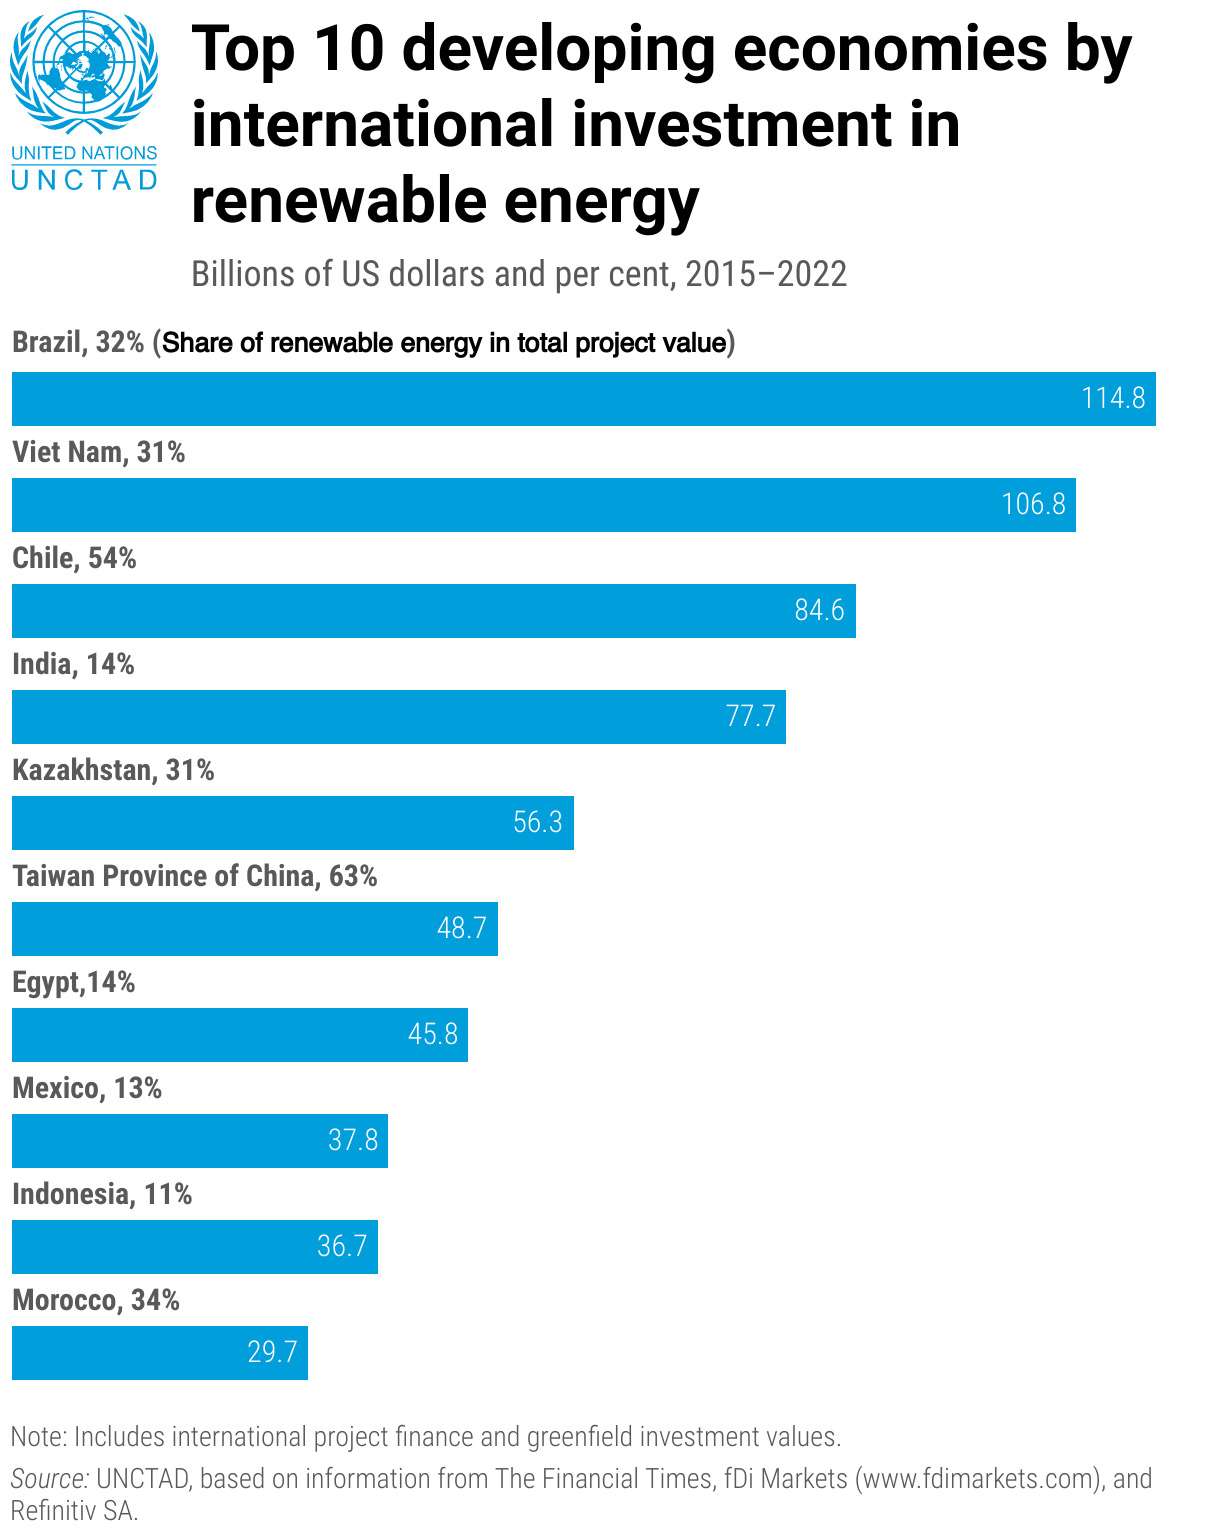 In the majority of the 10 developing nations with the highest levels of international investment in renewables, said investment accounts for between one-tenth and one-third of total Foreign Direct Investment (FDI).